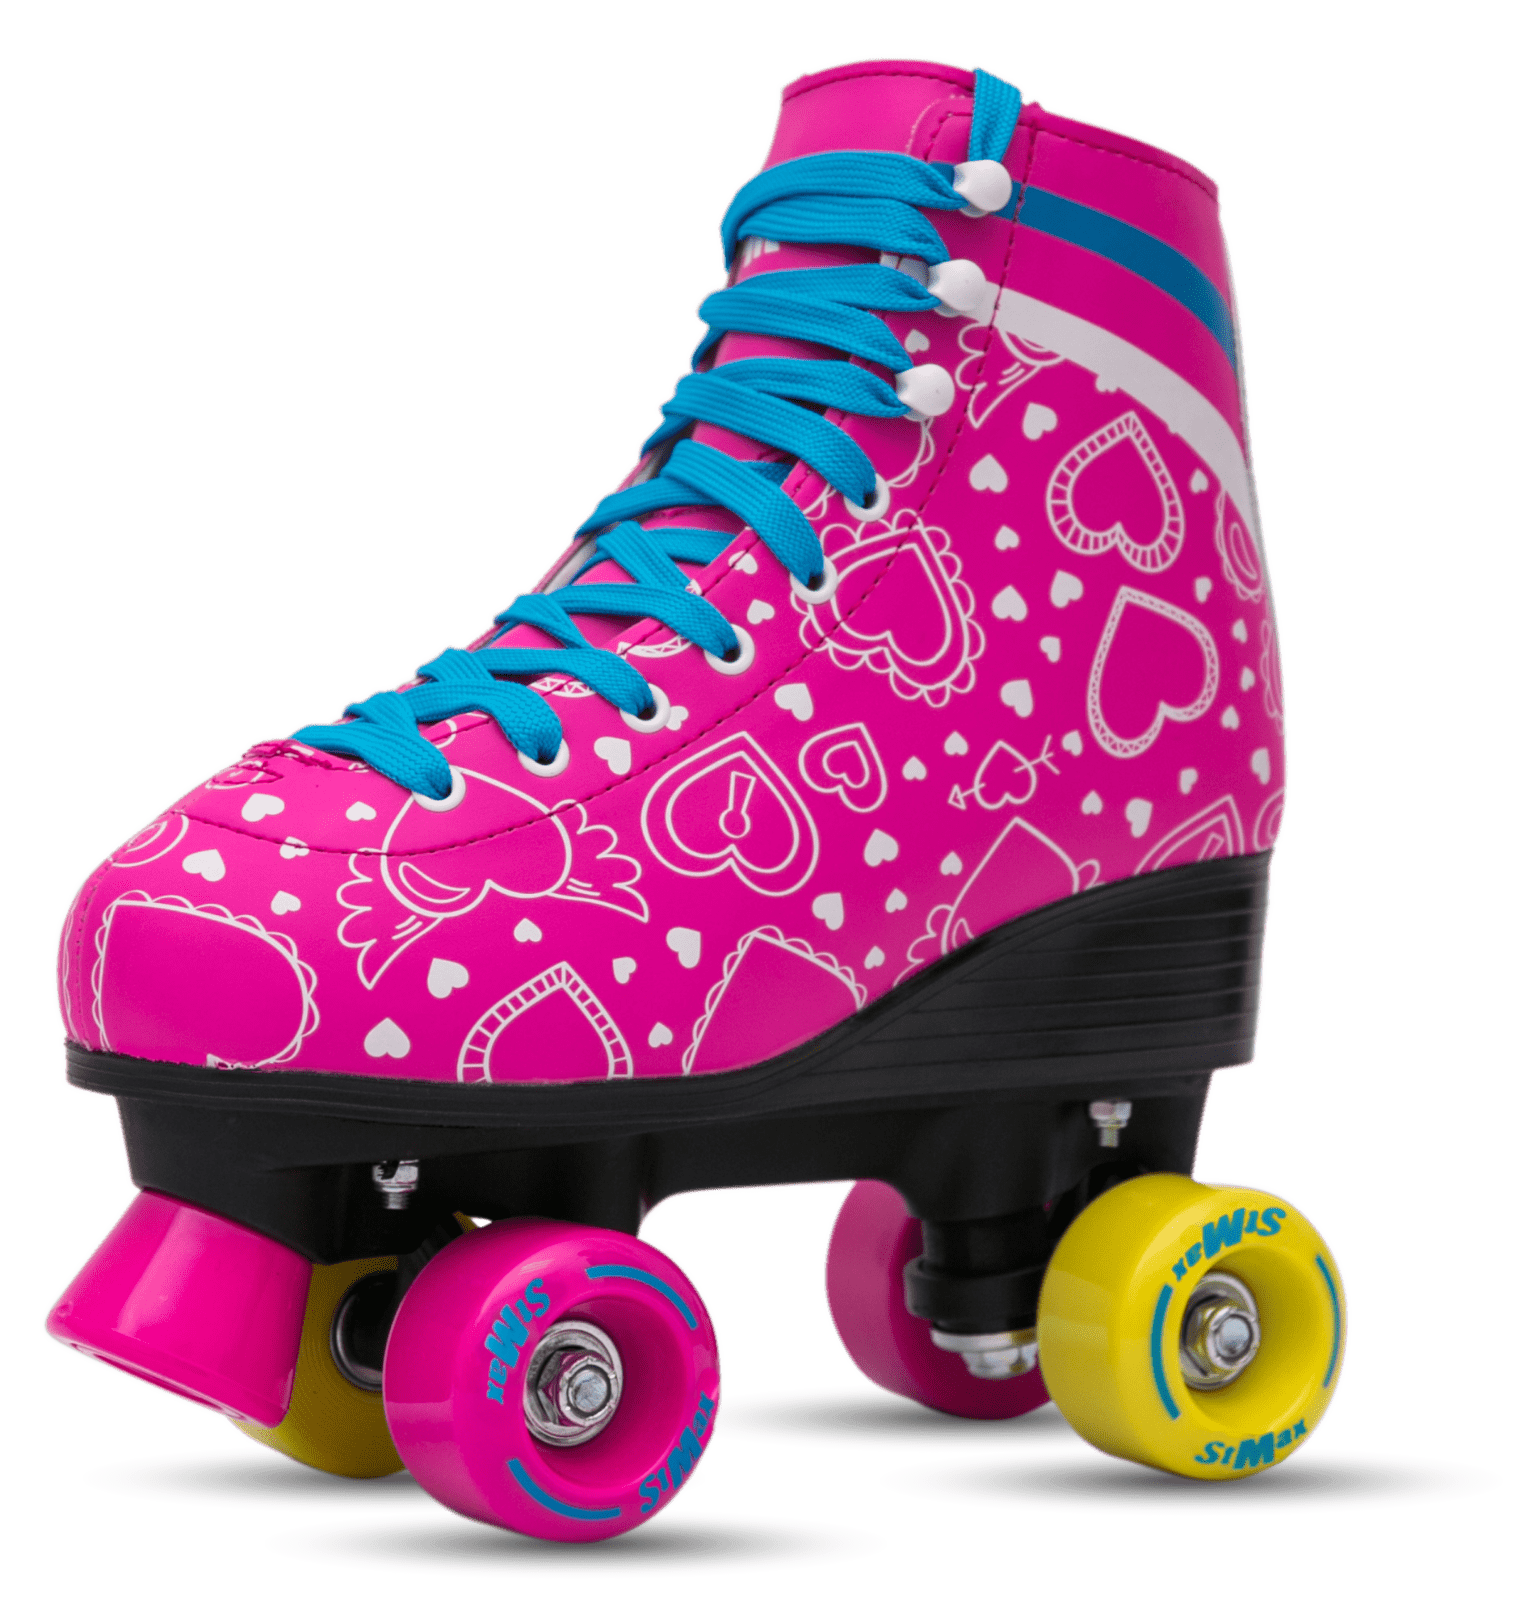 Stmax Quad Roller Skates for Girls  White and Purple size 5.5 Youth 4-Wheels 